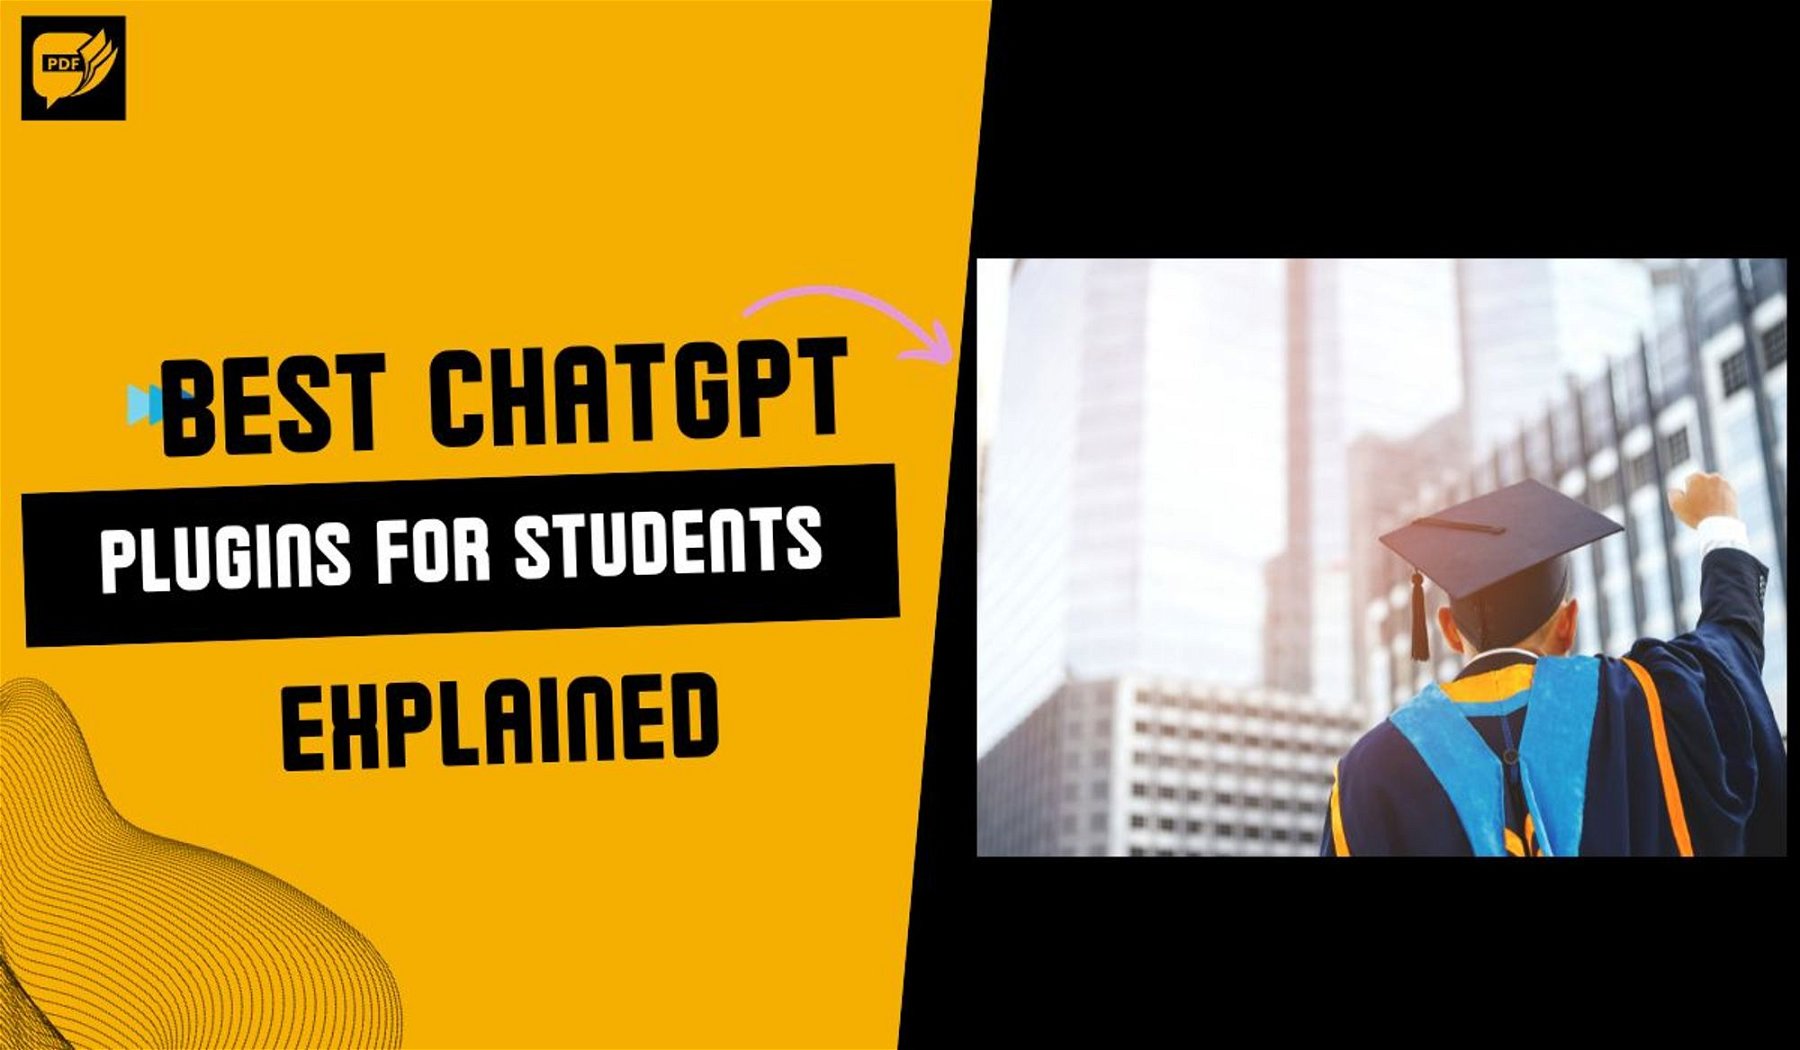 The Best ChatGPT Plugins for Students